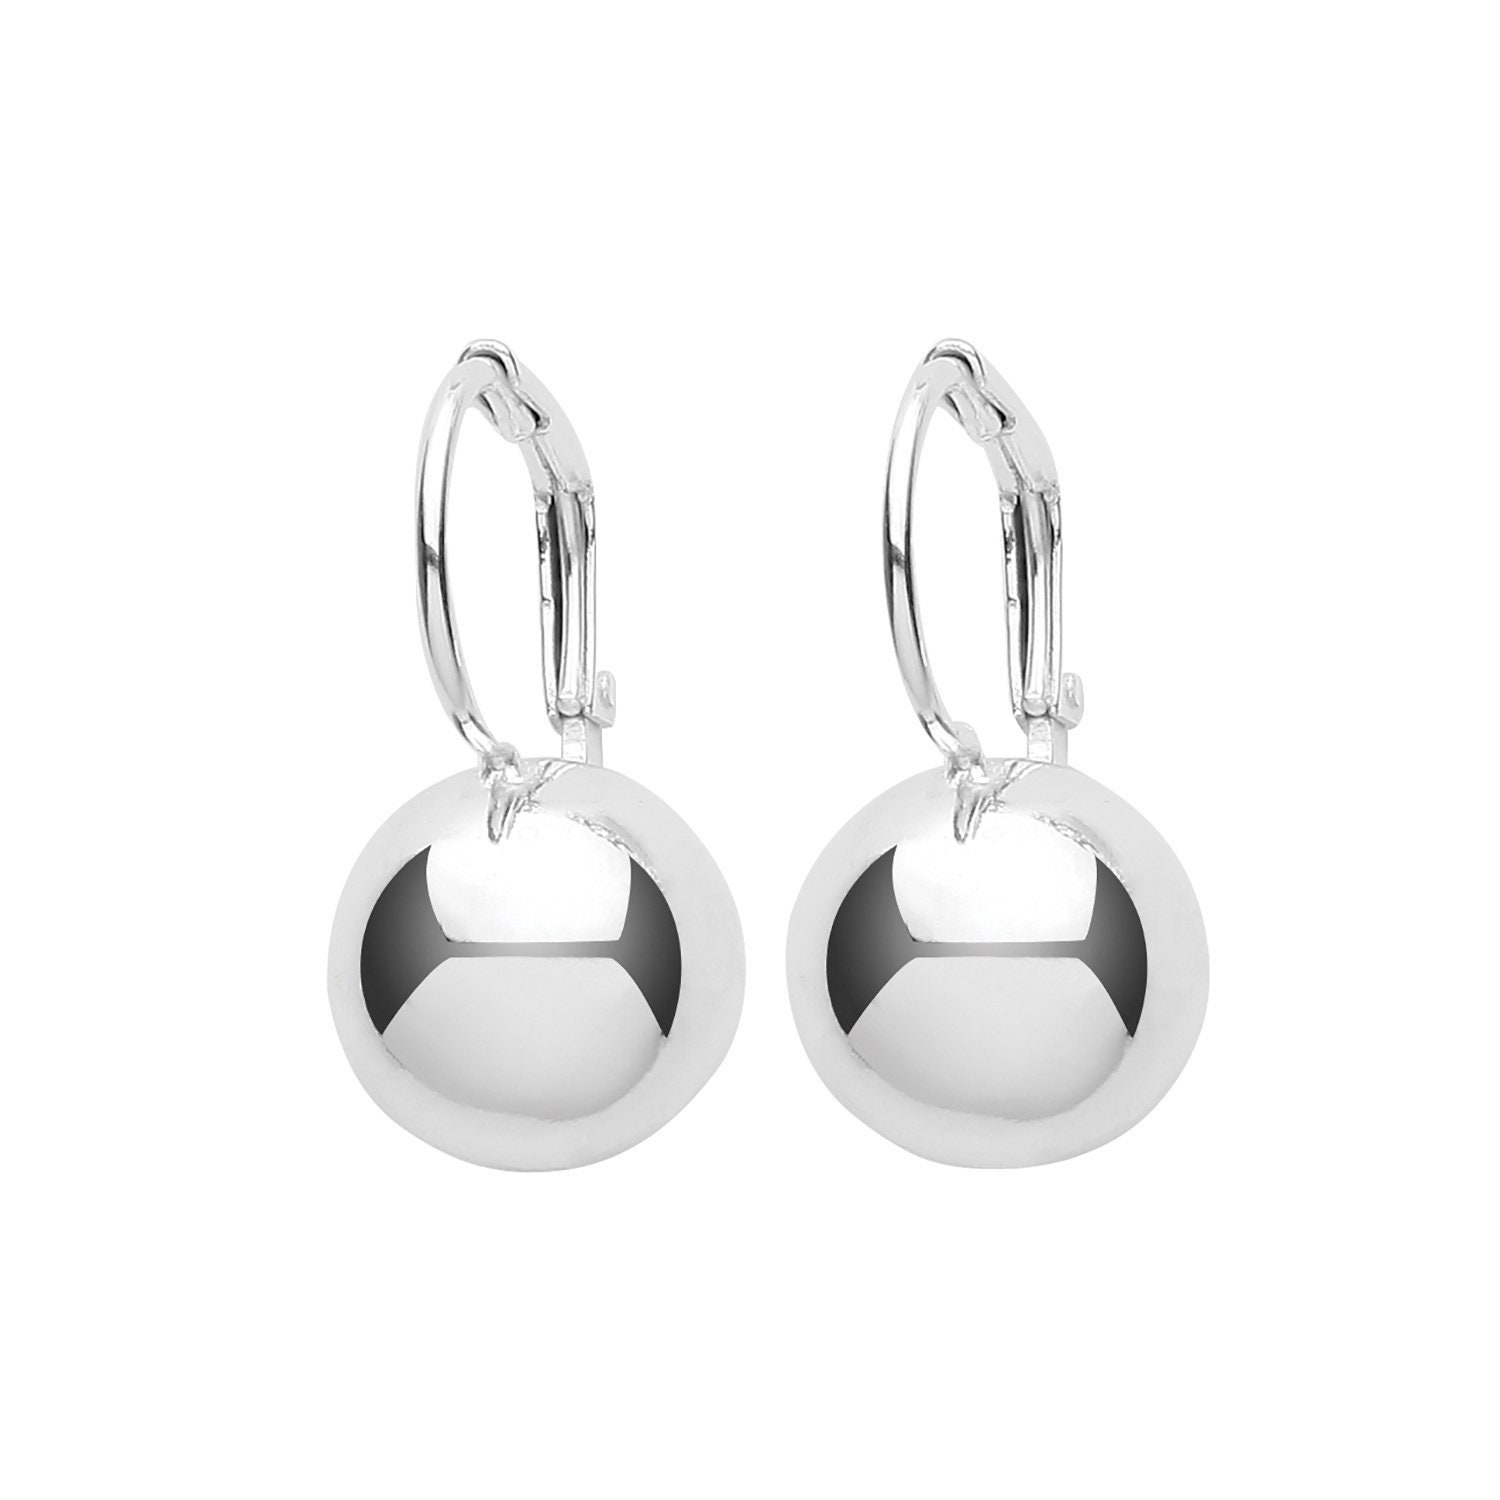 Buy Sterling Silver Ball Stud Earring 3mm10mm 4 Millimeters at Amazonin